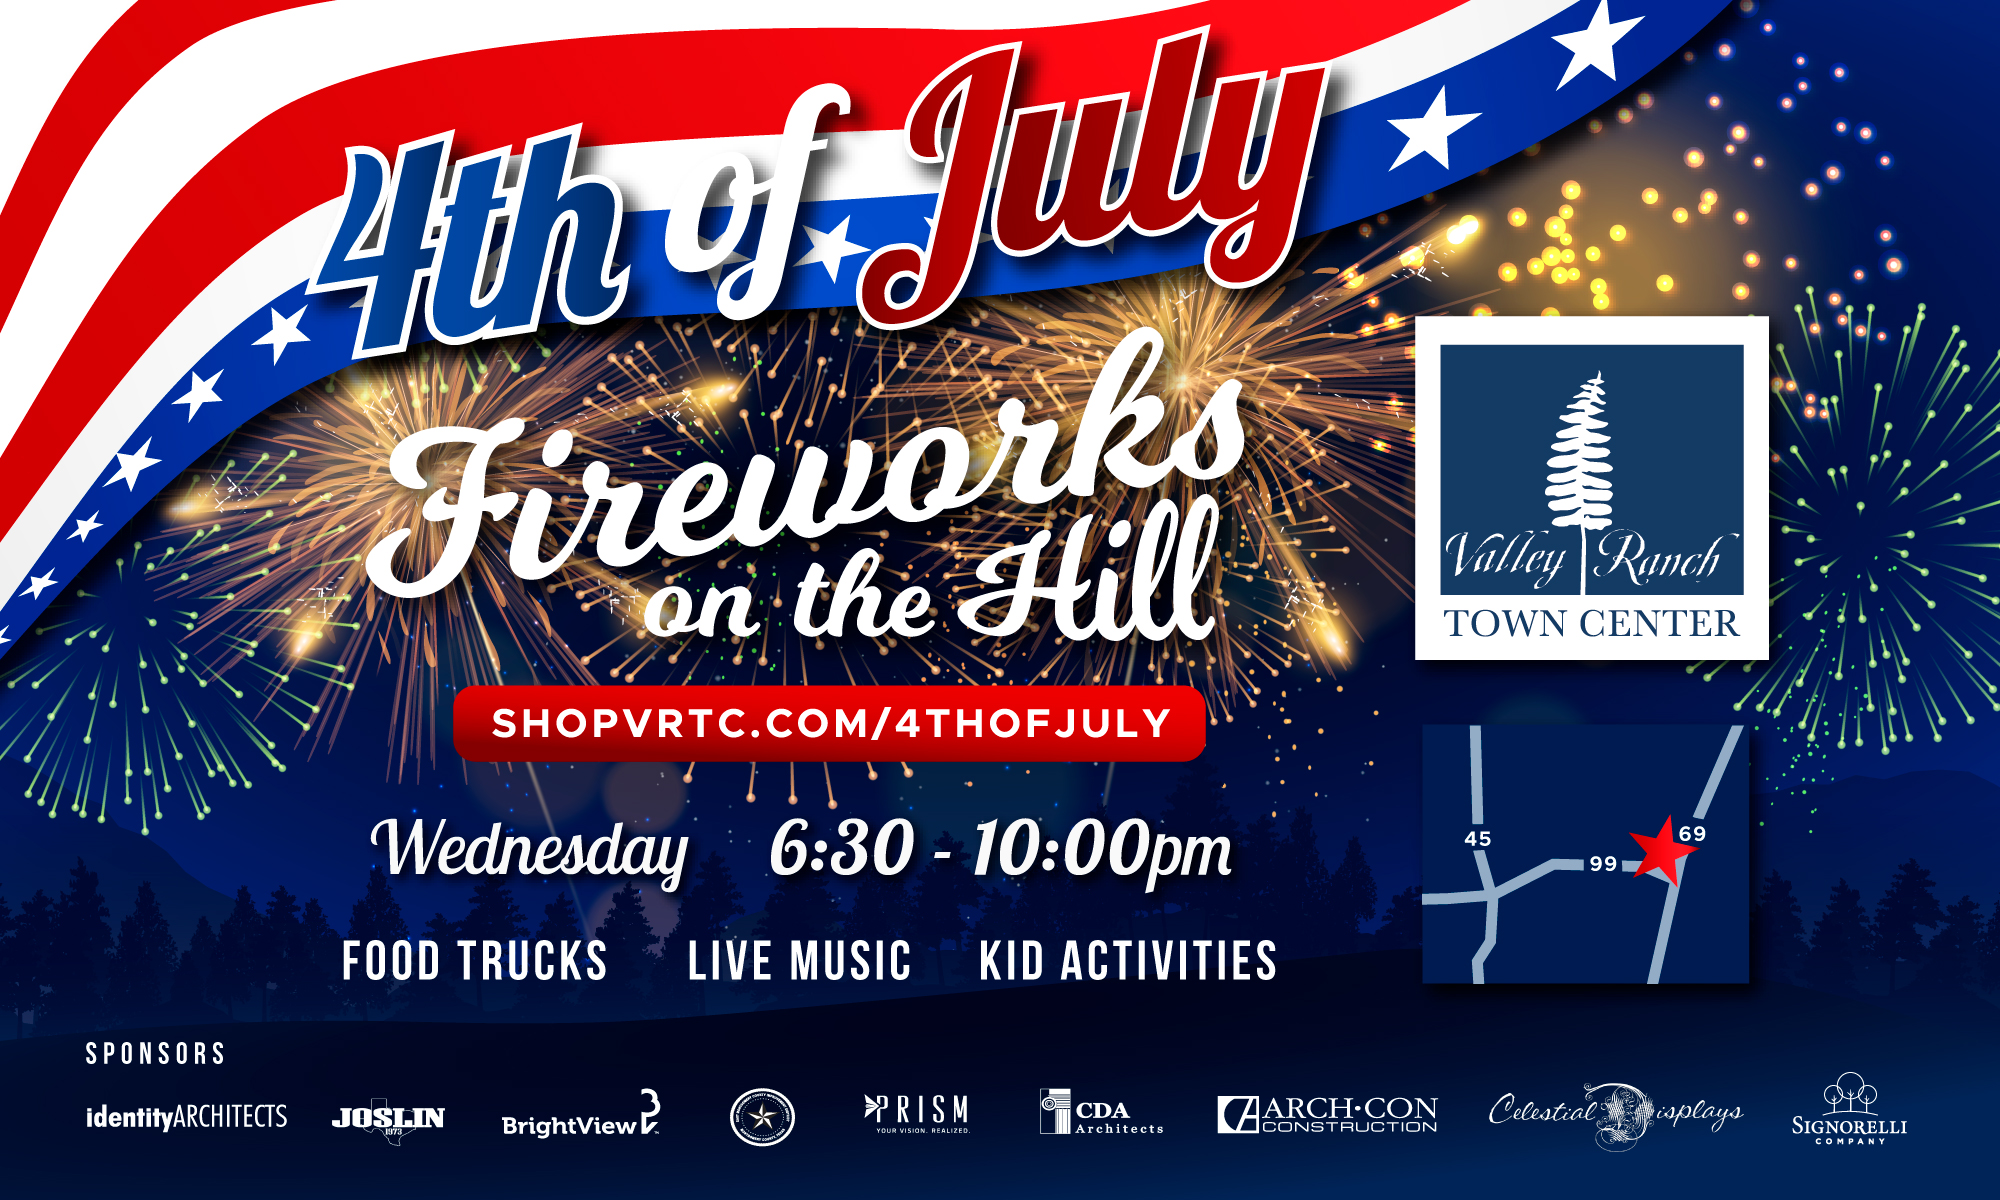 Mark Your Calendars 4th of July Fireworks on the Hill